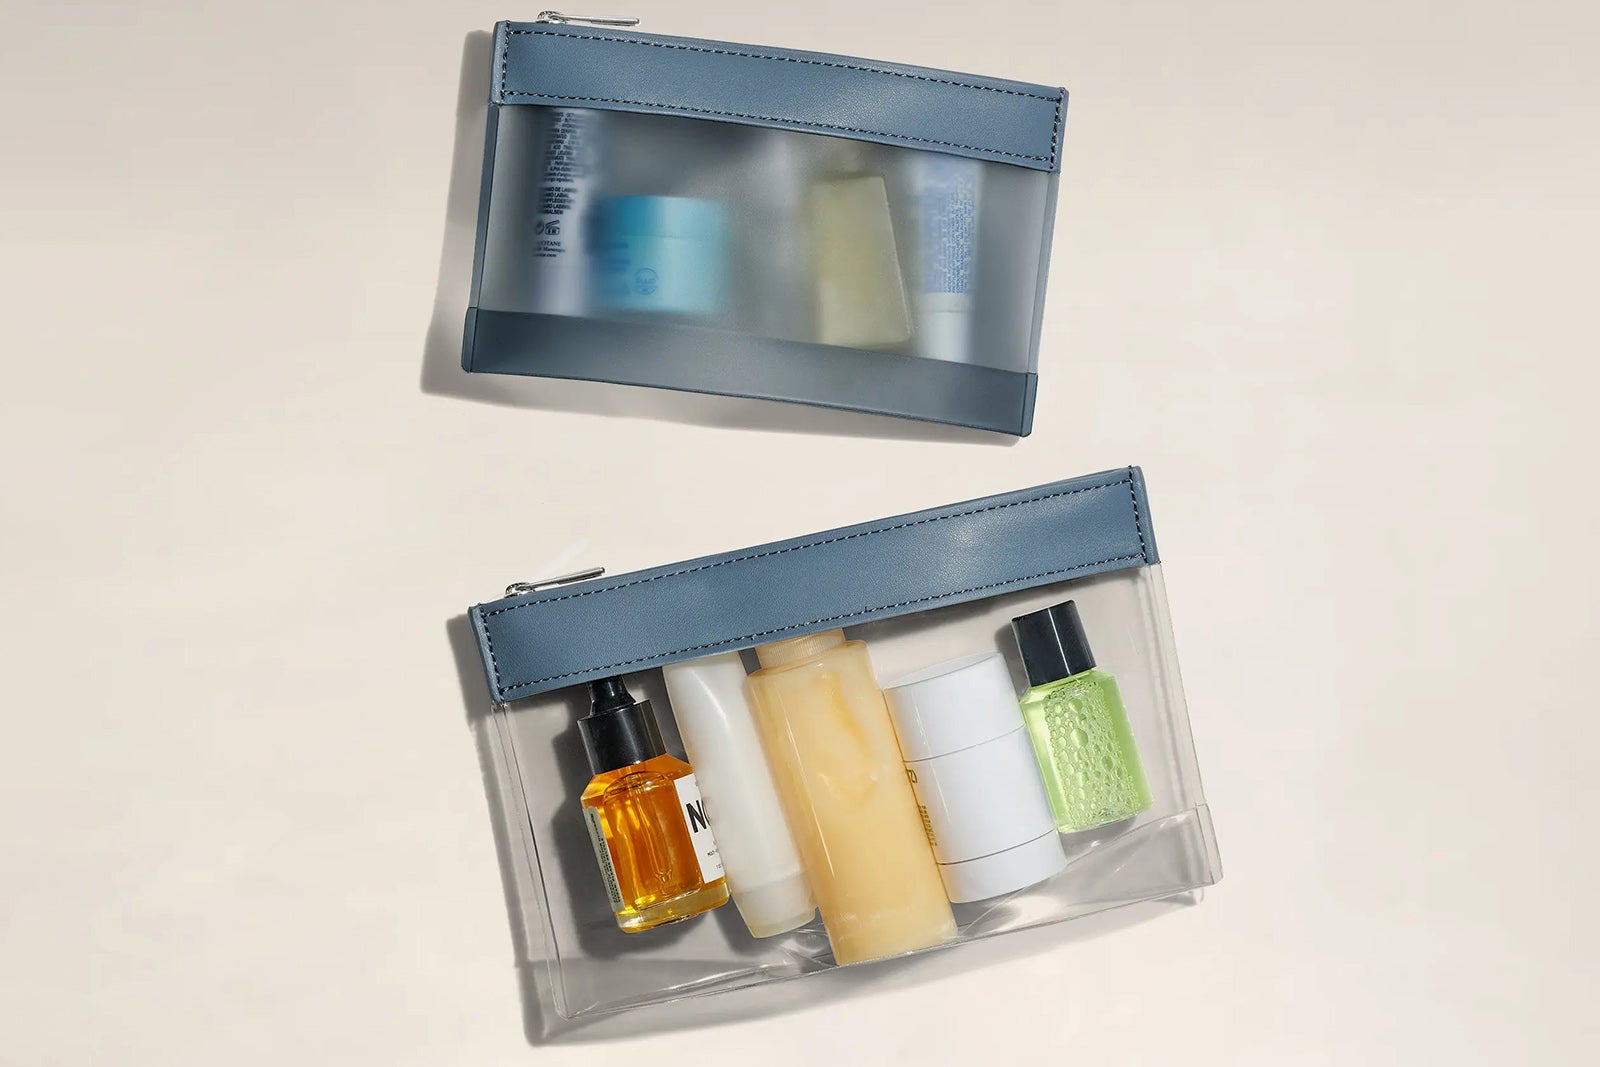 travel size toiletries american airlines